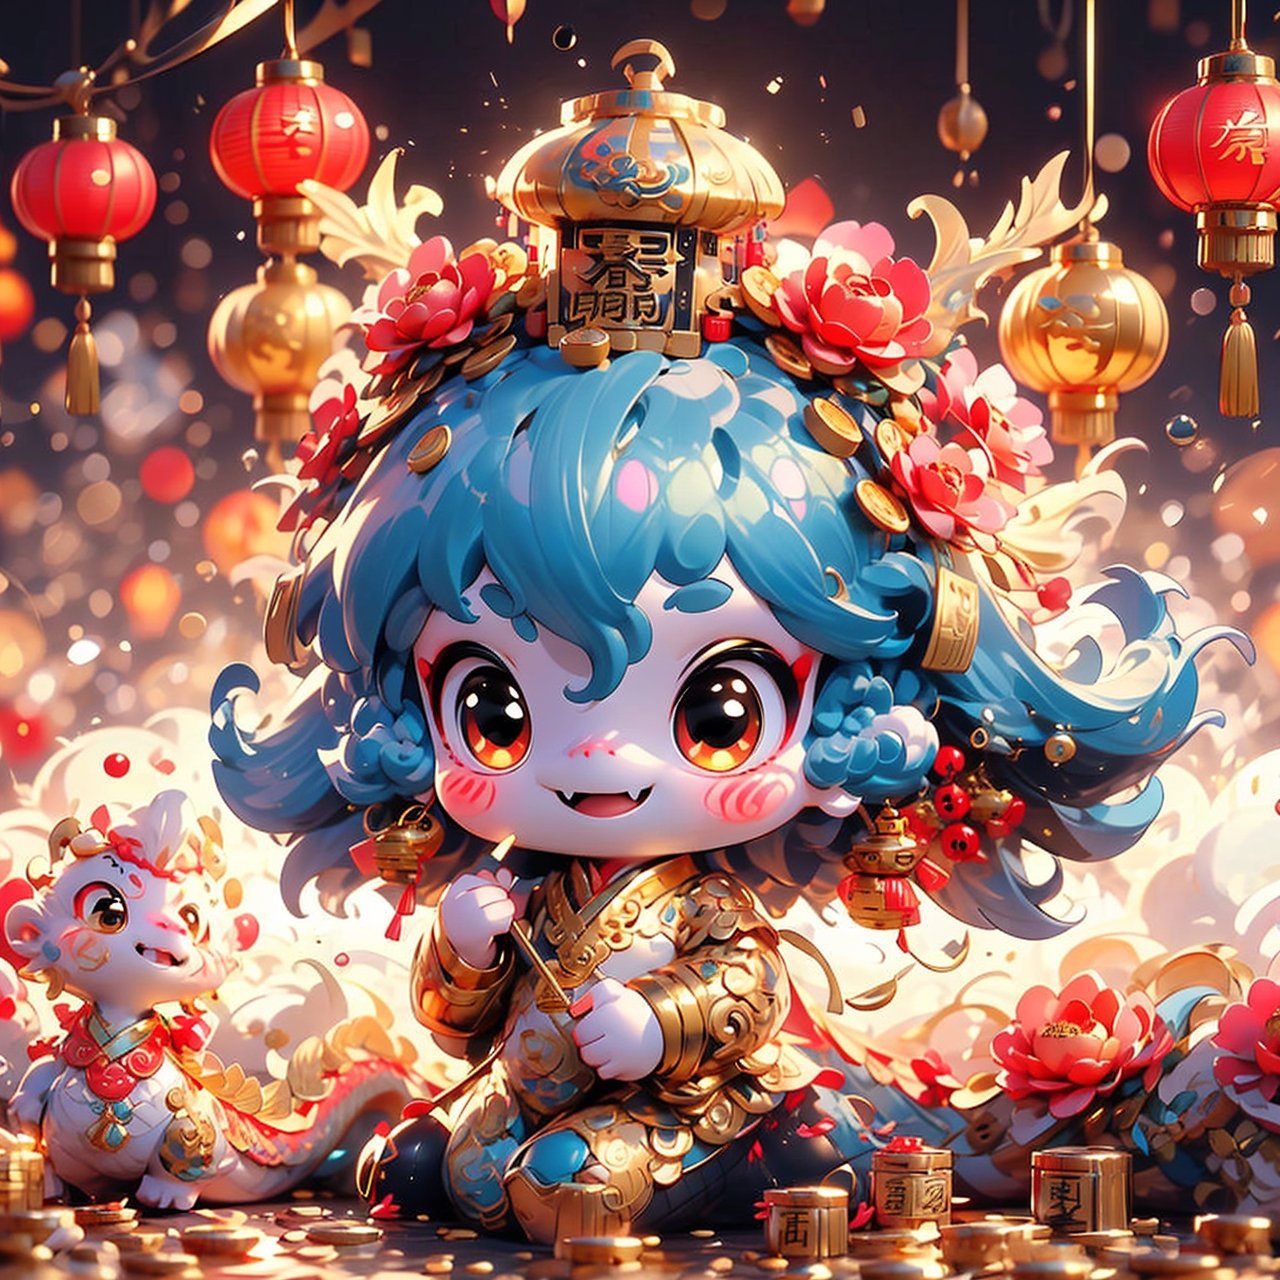  little chinese (boy and girl) nendoroid style (jumping) hold a chinese red packet with a transclucent golden dragon emerges out from the smartphone, splashing of (gold coins) effect. background (miniature red lanterns) on the table。